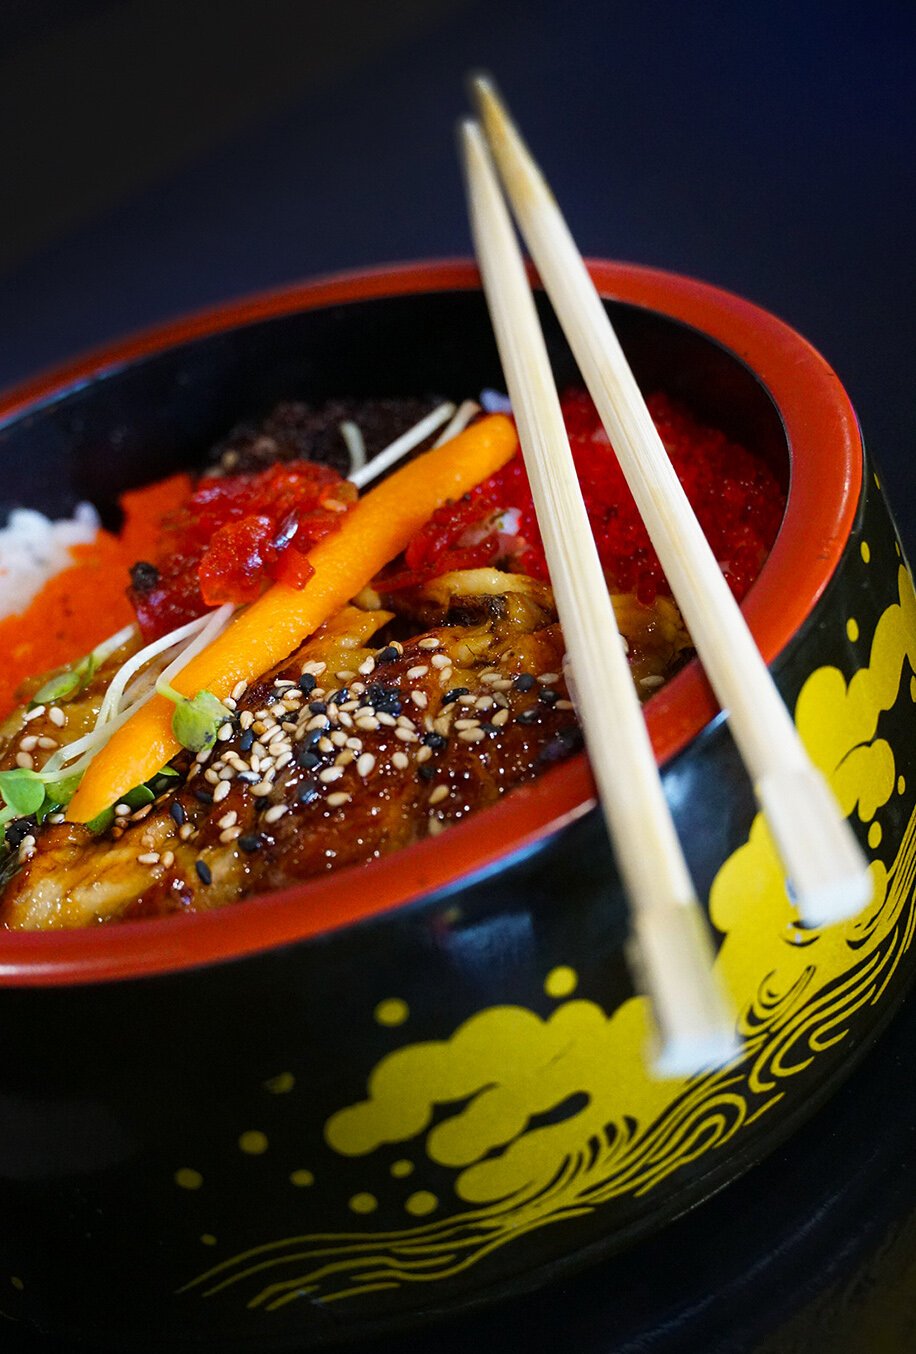 The unagi donburi is presented beautifully with colorful sections of eel, tobiko, and masago placed over subtly seasoned rice.